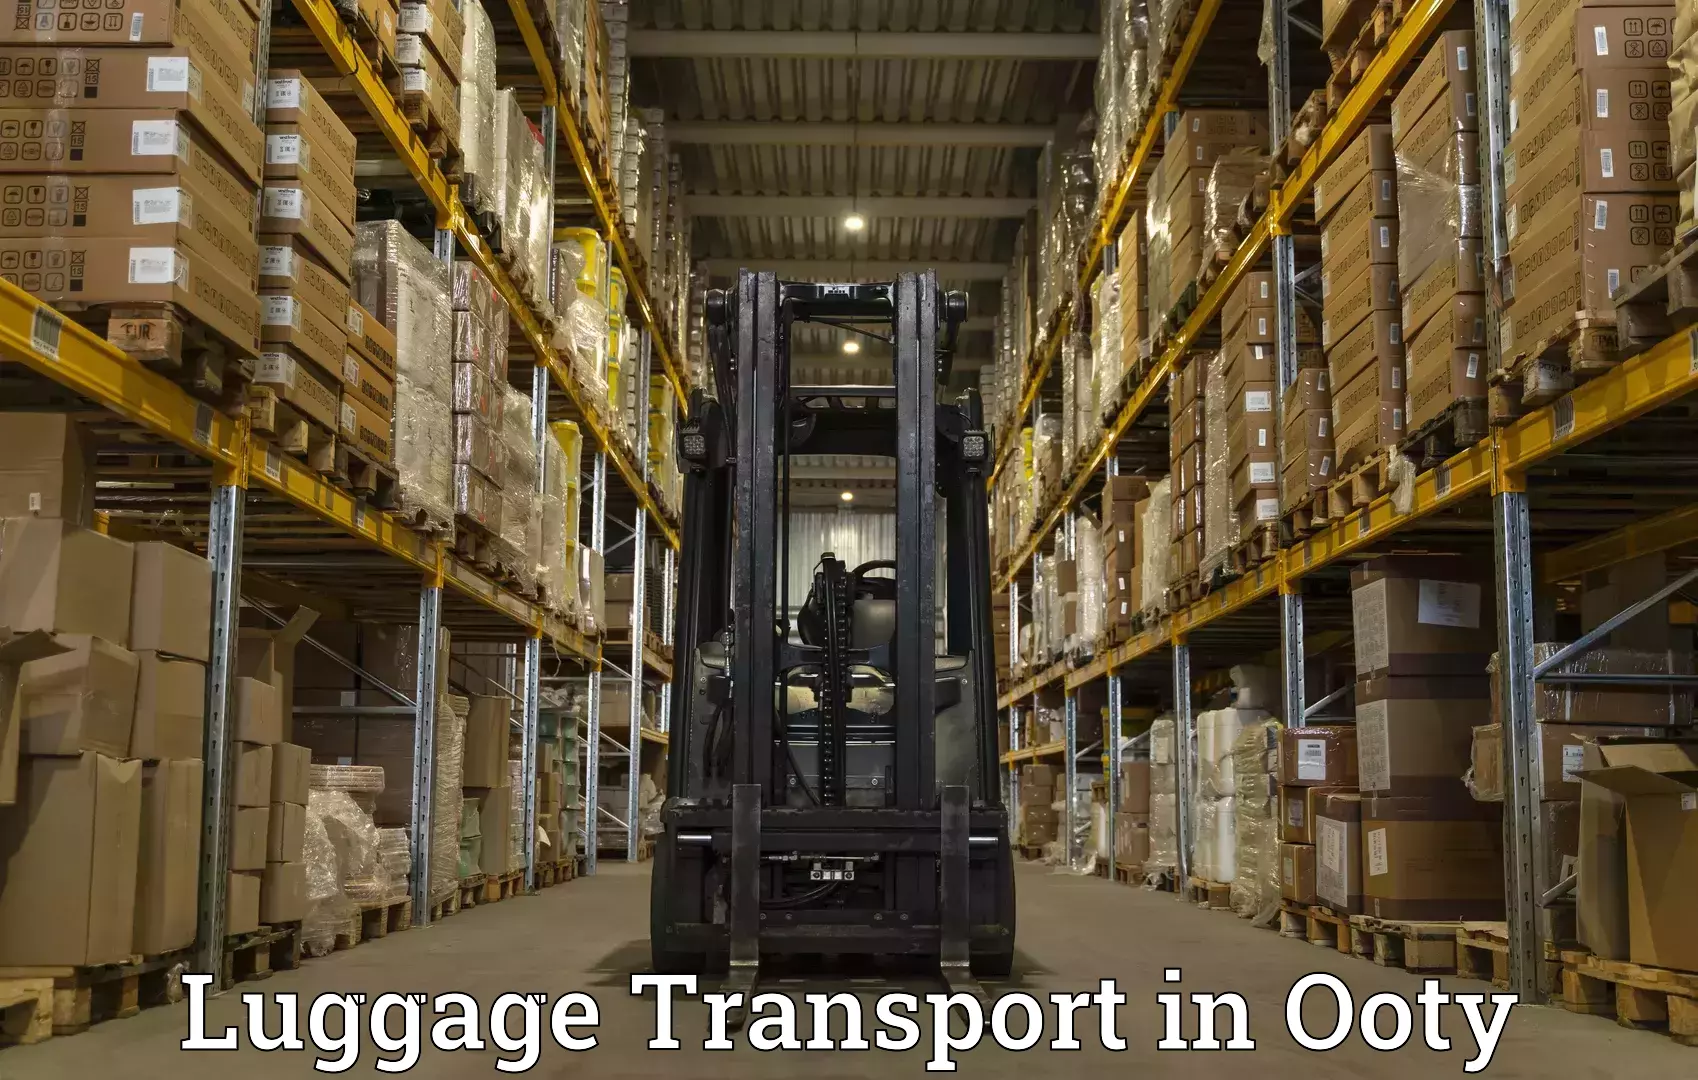 Luggage storage and delivery in Ooty